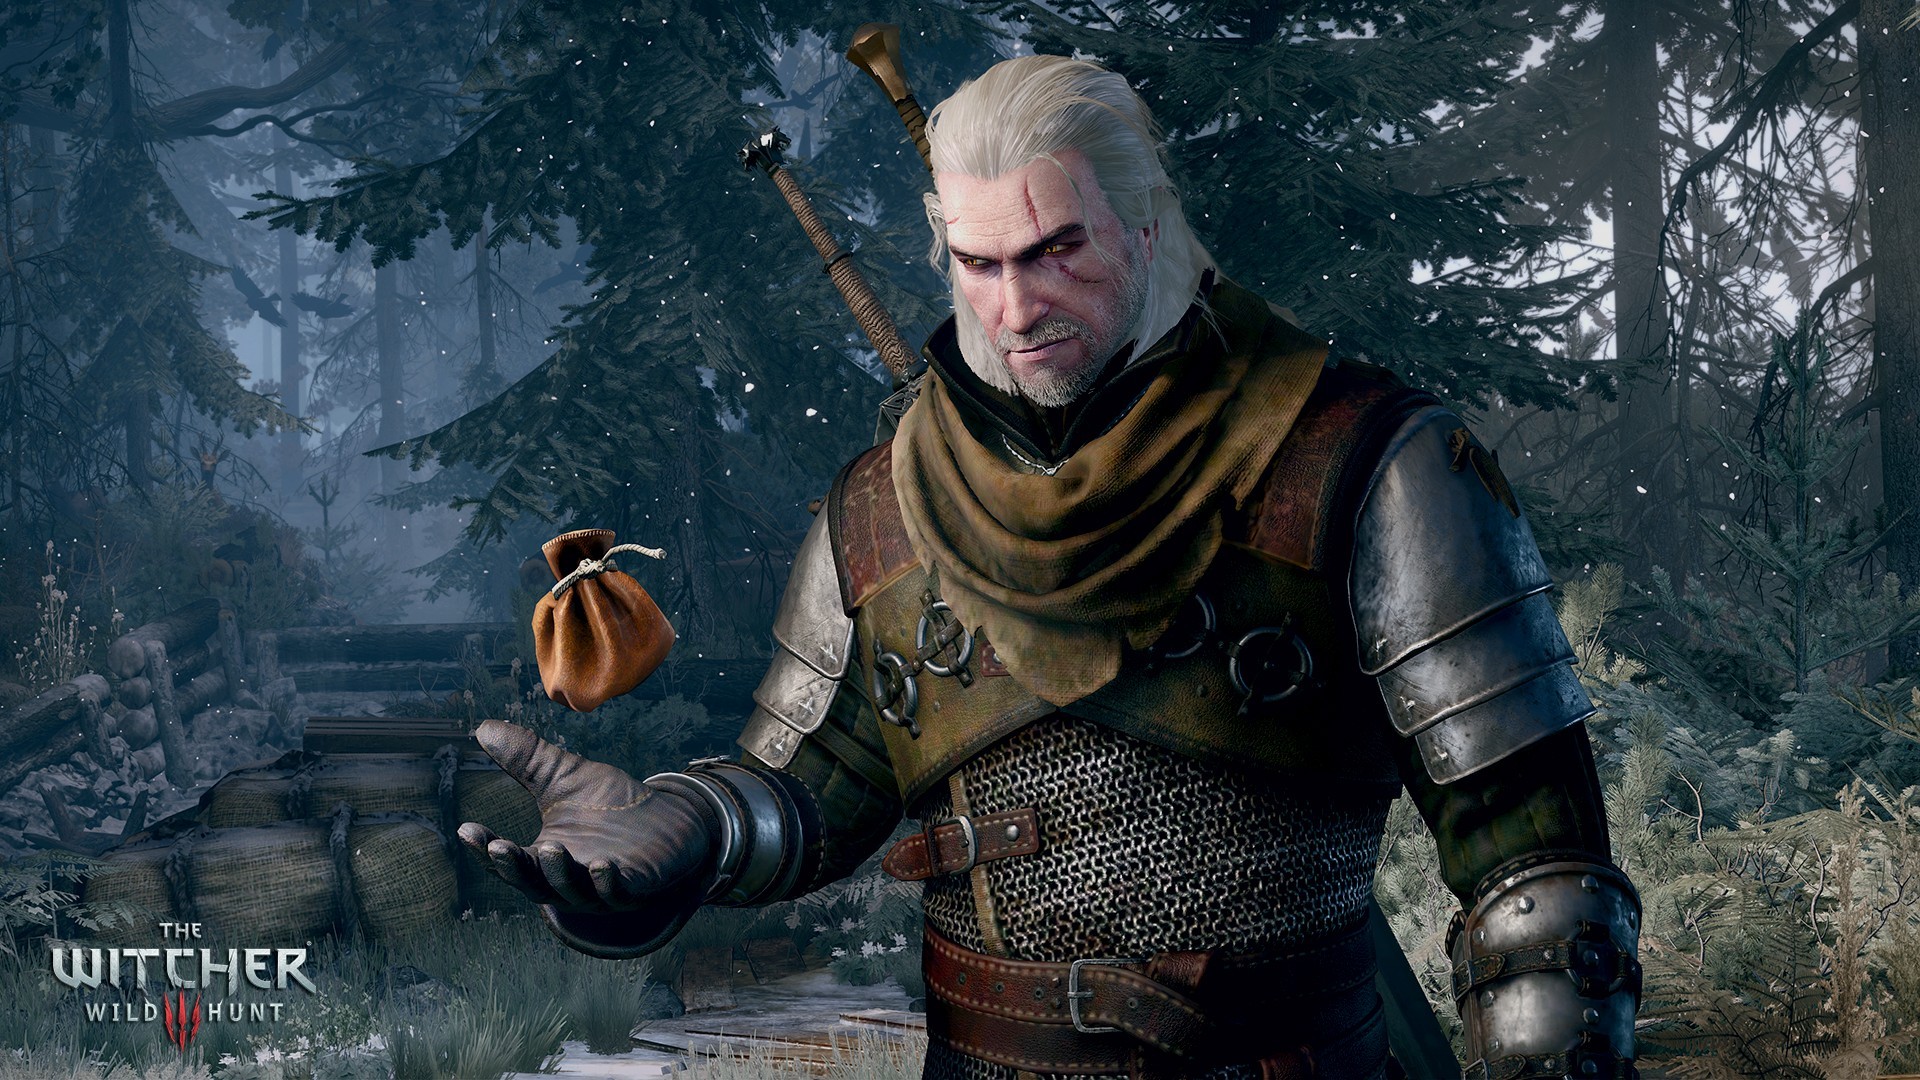 The Witcher TV Series Will Be Very “Adult” Show